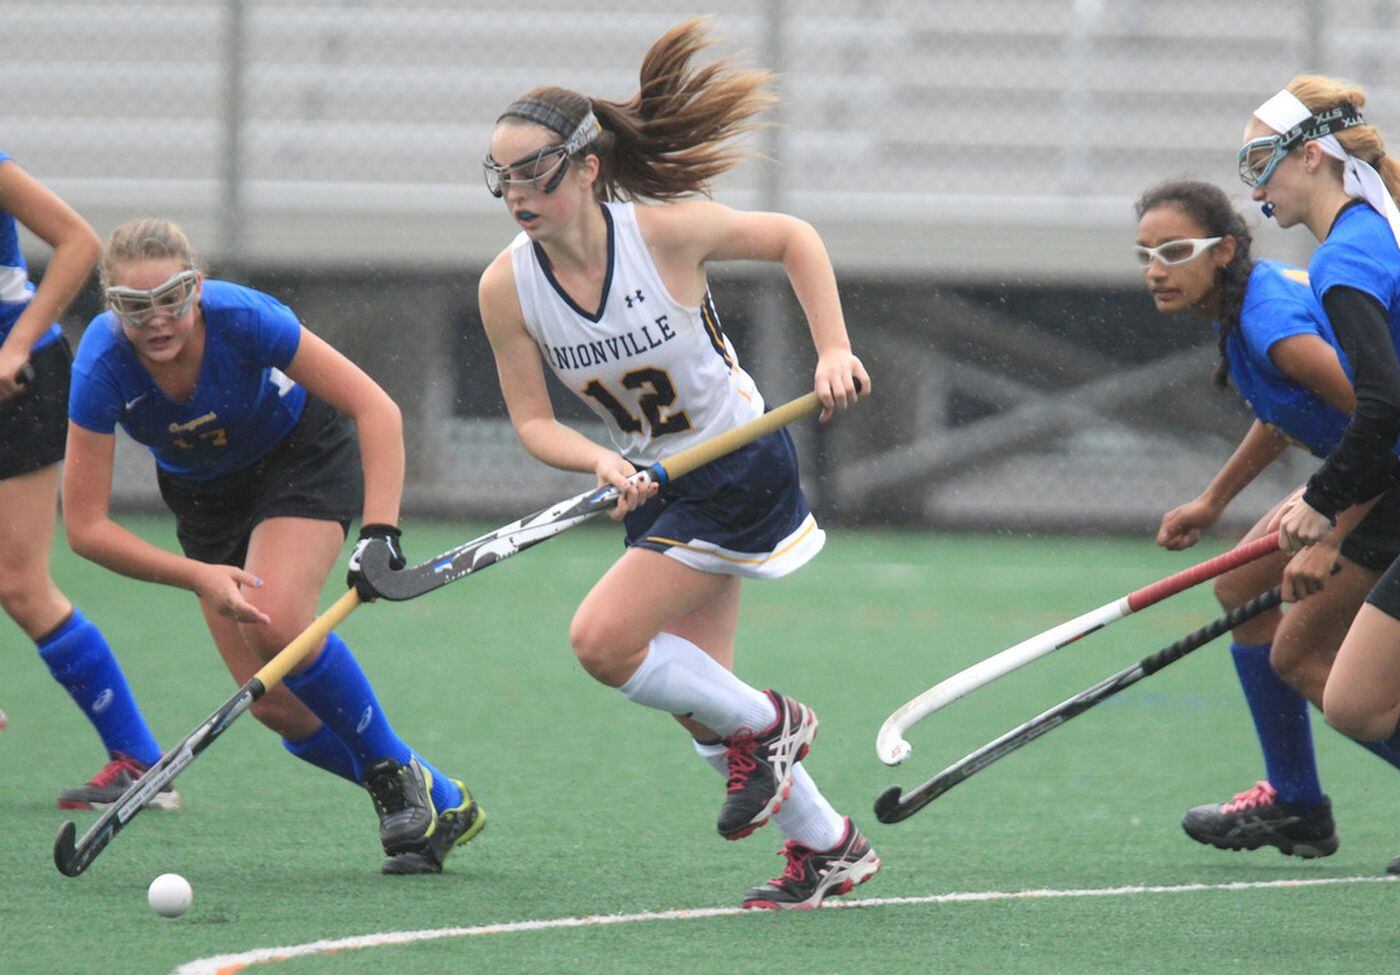 At Unionville, Matson made all-America and all-region teams, was the Ches-M...